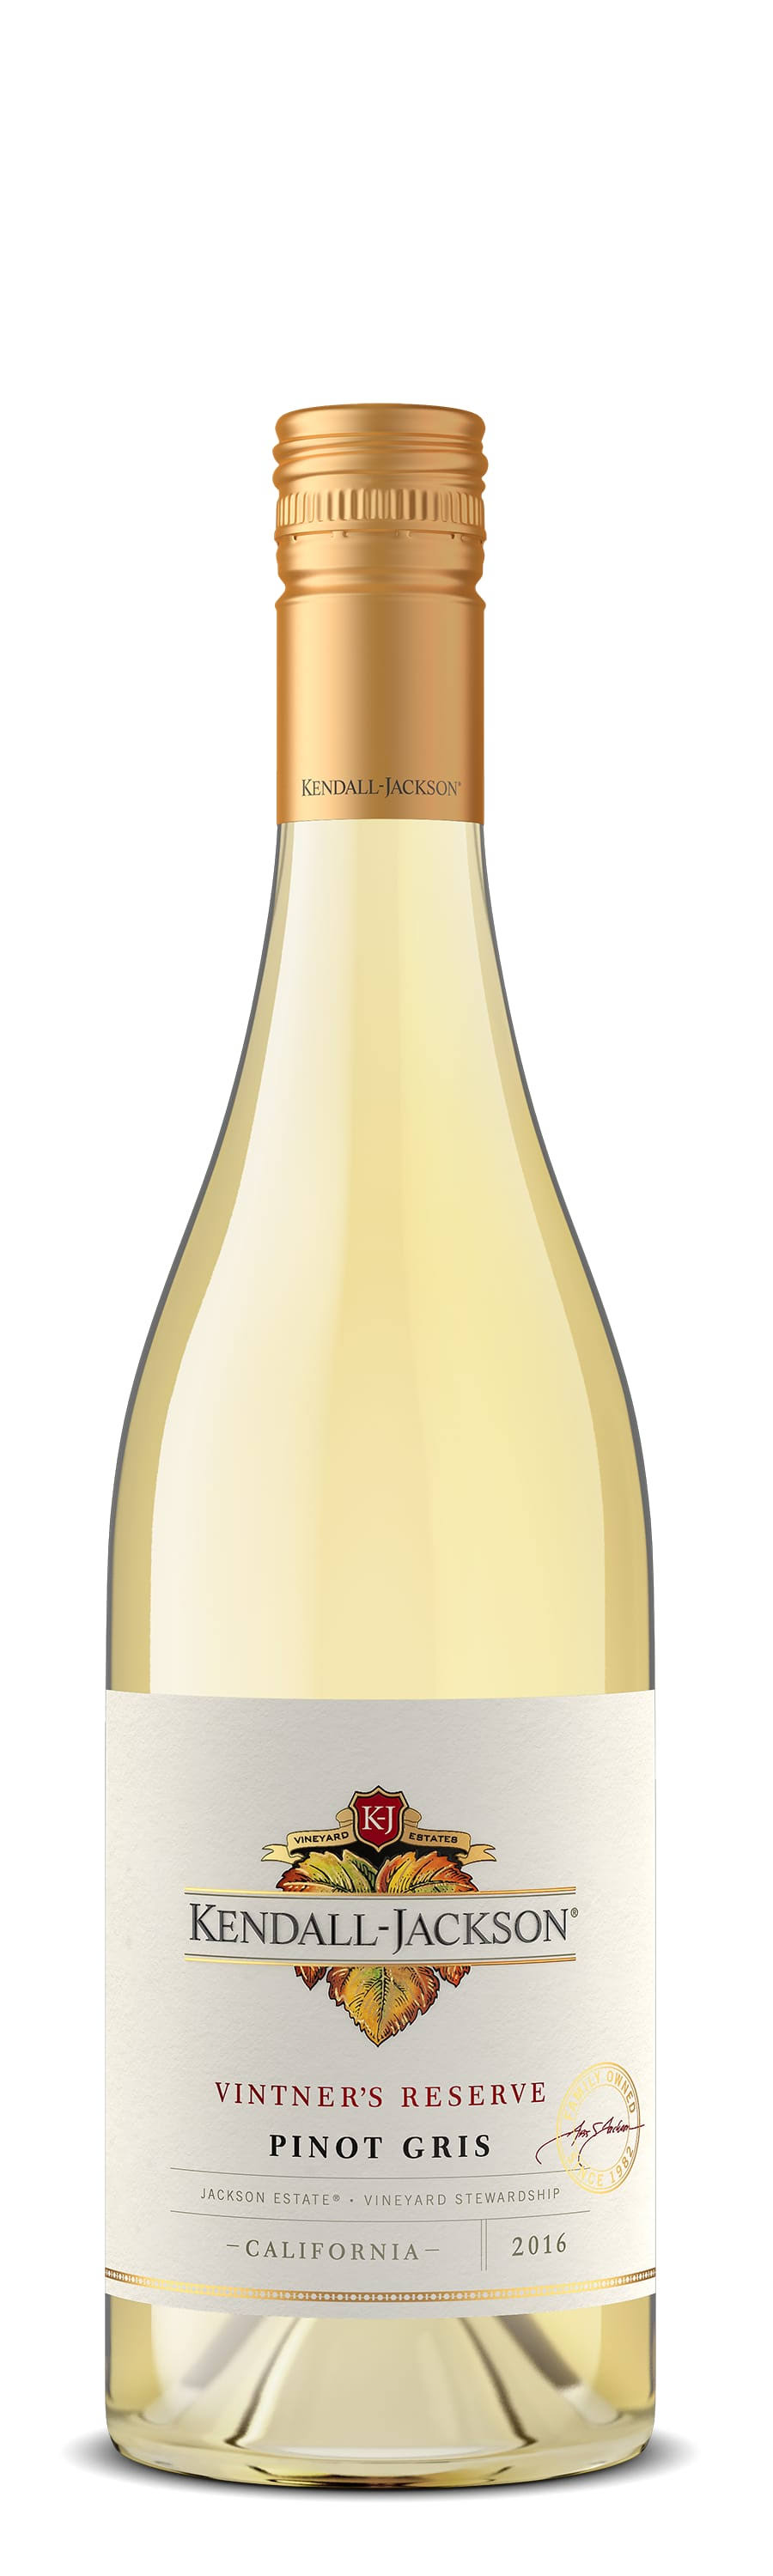 Kendall-Jackson Vintners Reserve Pinot Gris